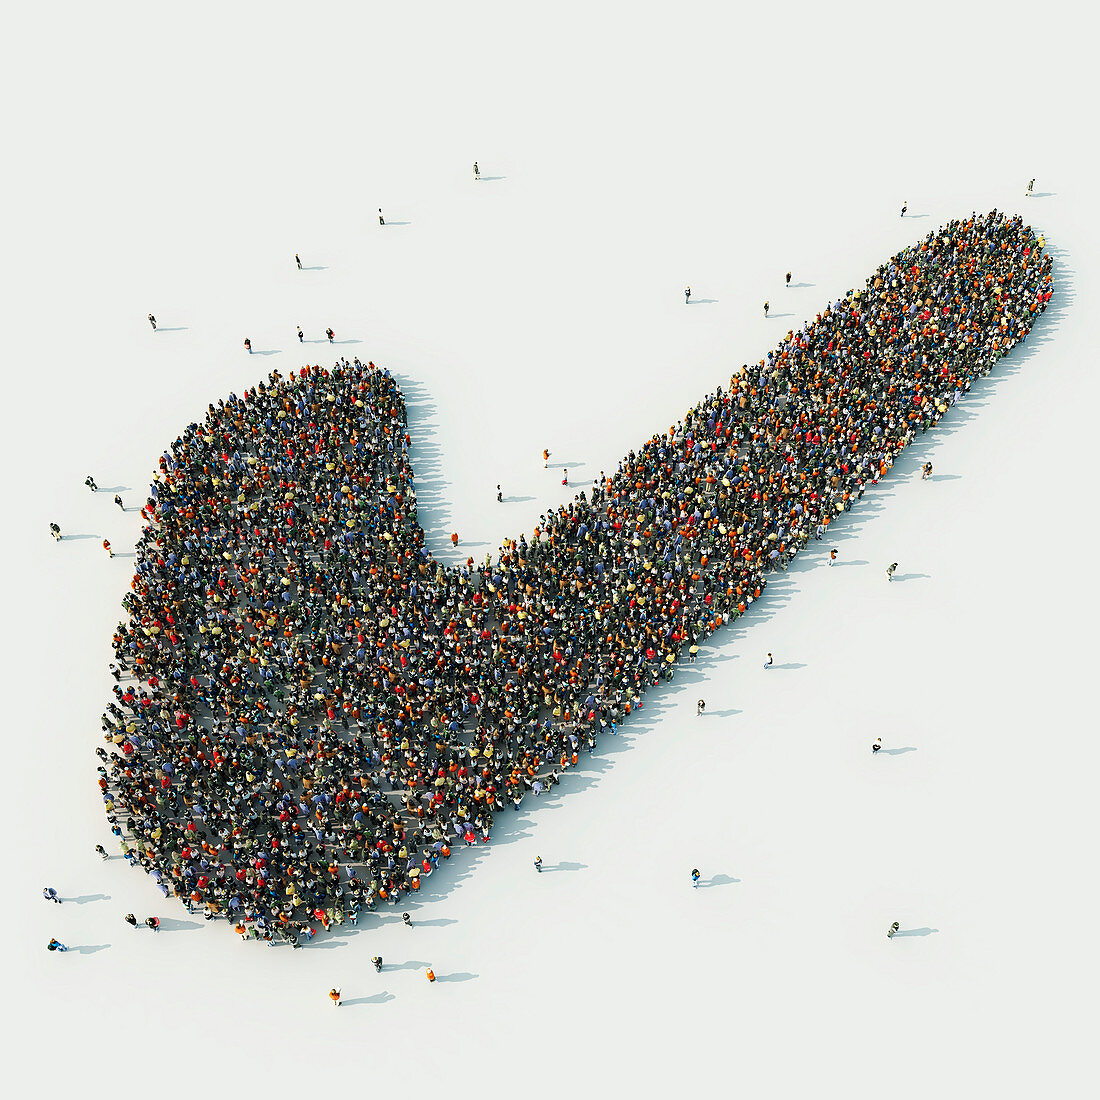 People arranged in check mark, illustration